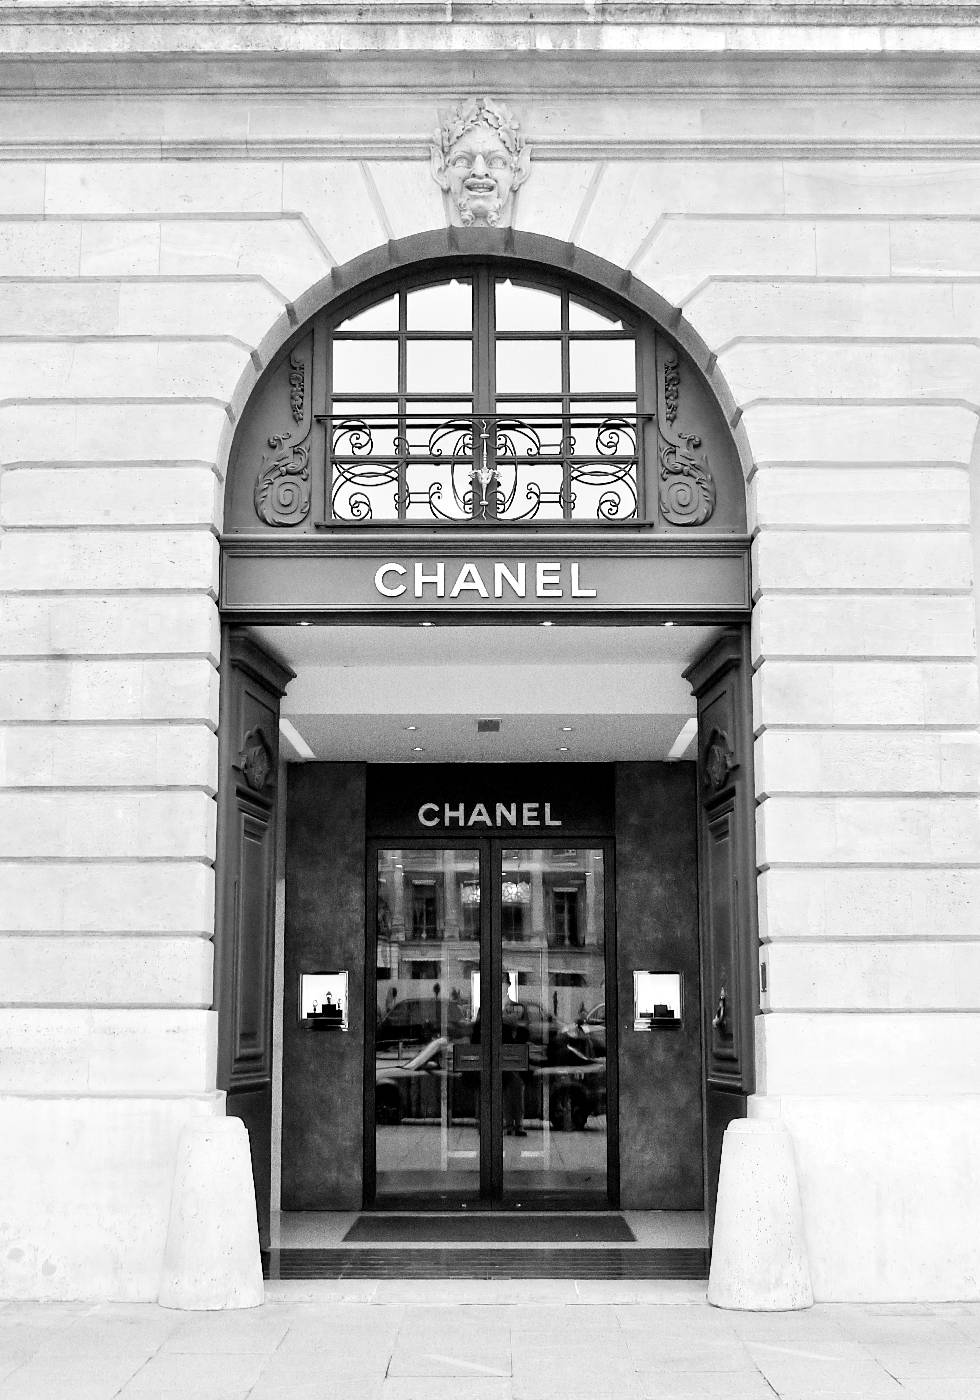 Chanel Parisian Chic - Storefront Poster